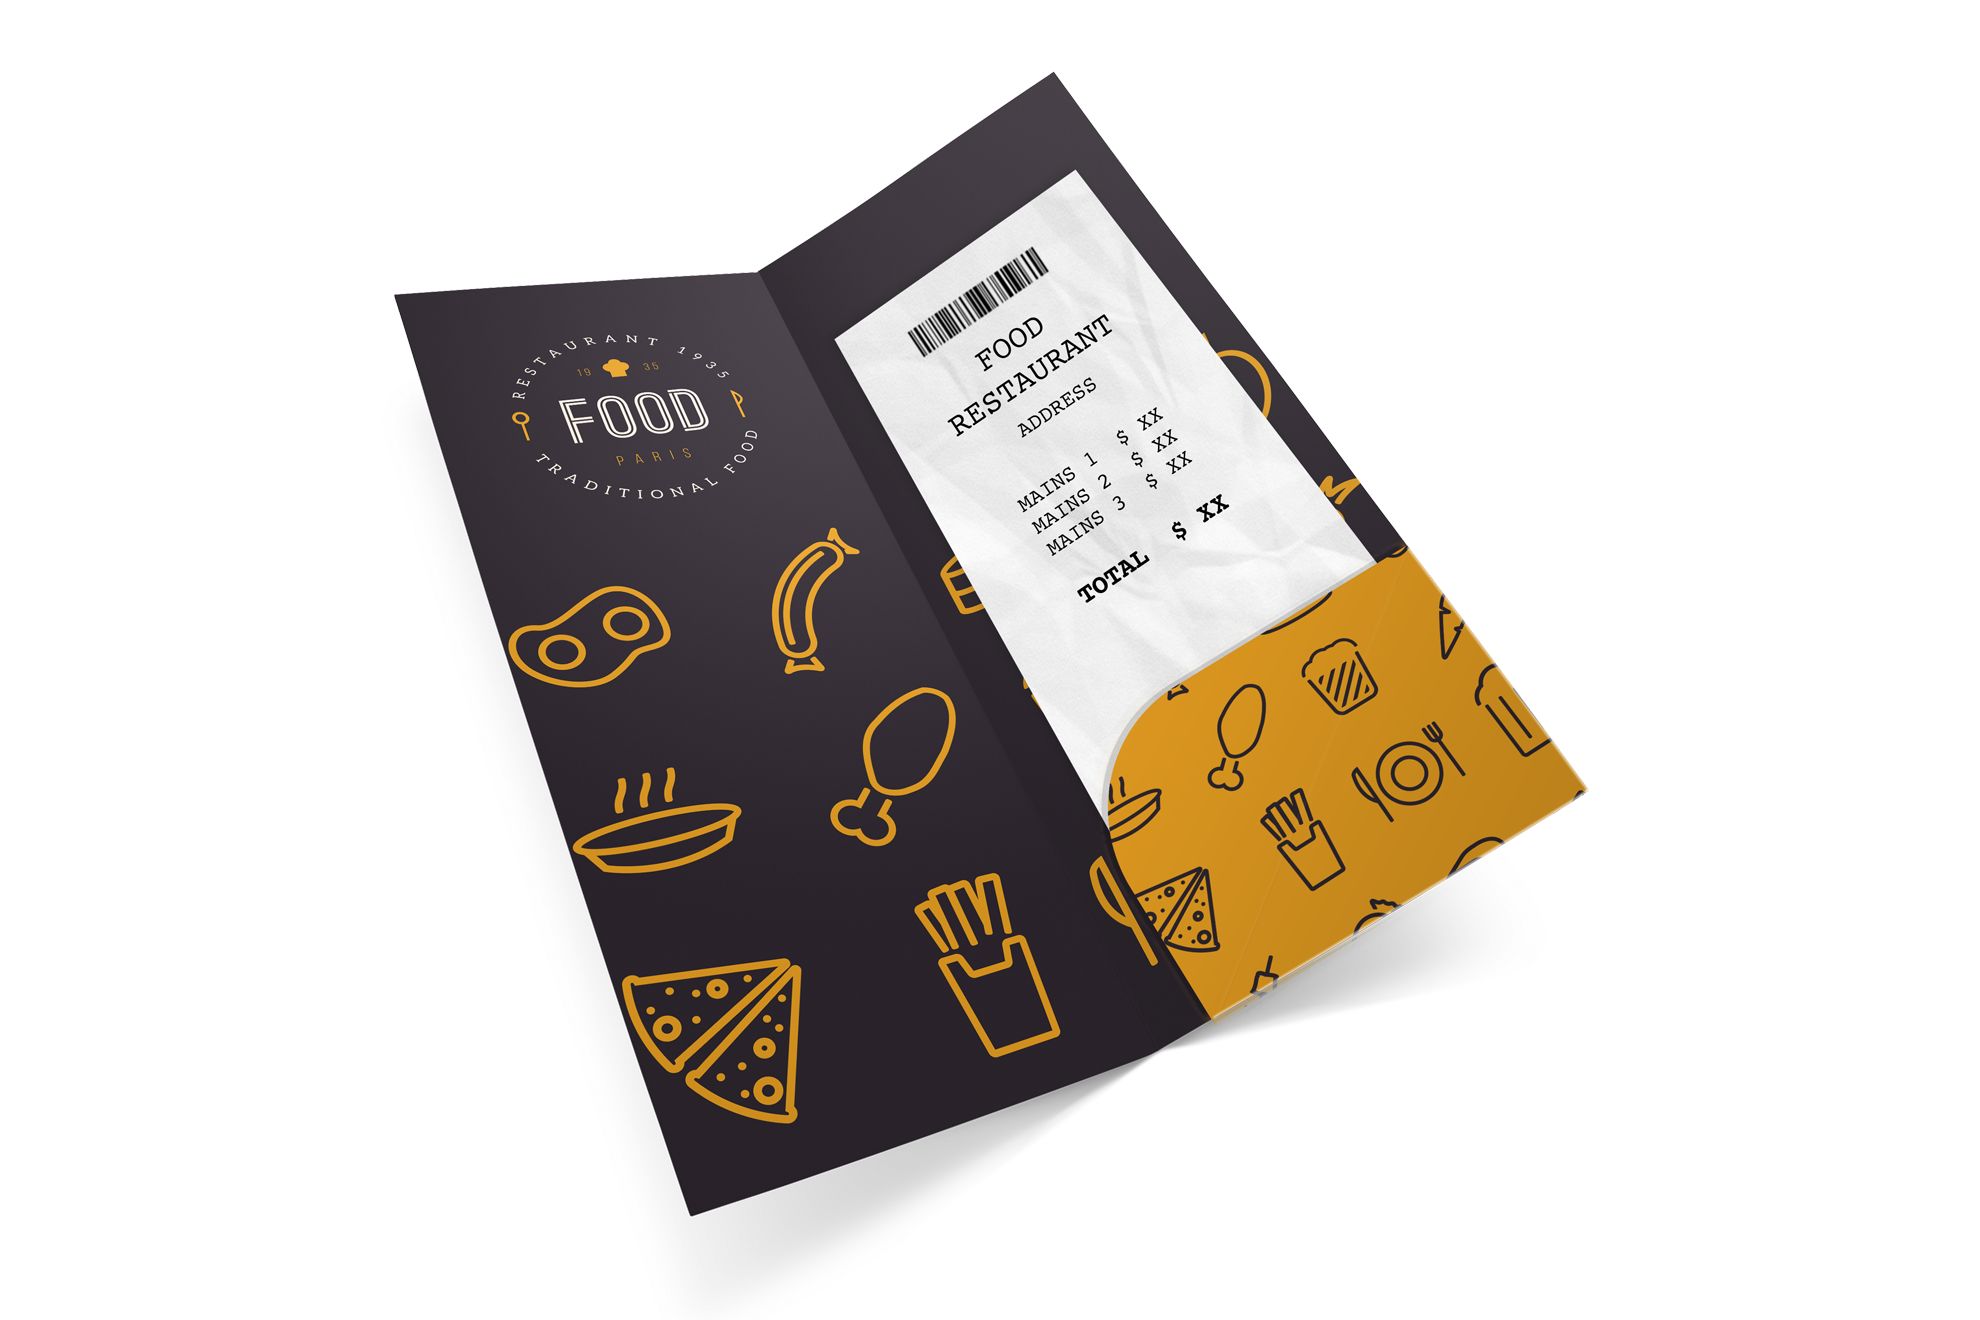 Customizable Bill holders with Pocket. Quality and affordable prices!: Customised bill holders with pocket with Sprint24. Save money with the online printing, without sacrificing quality!